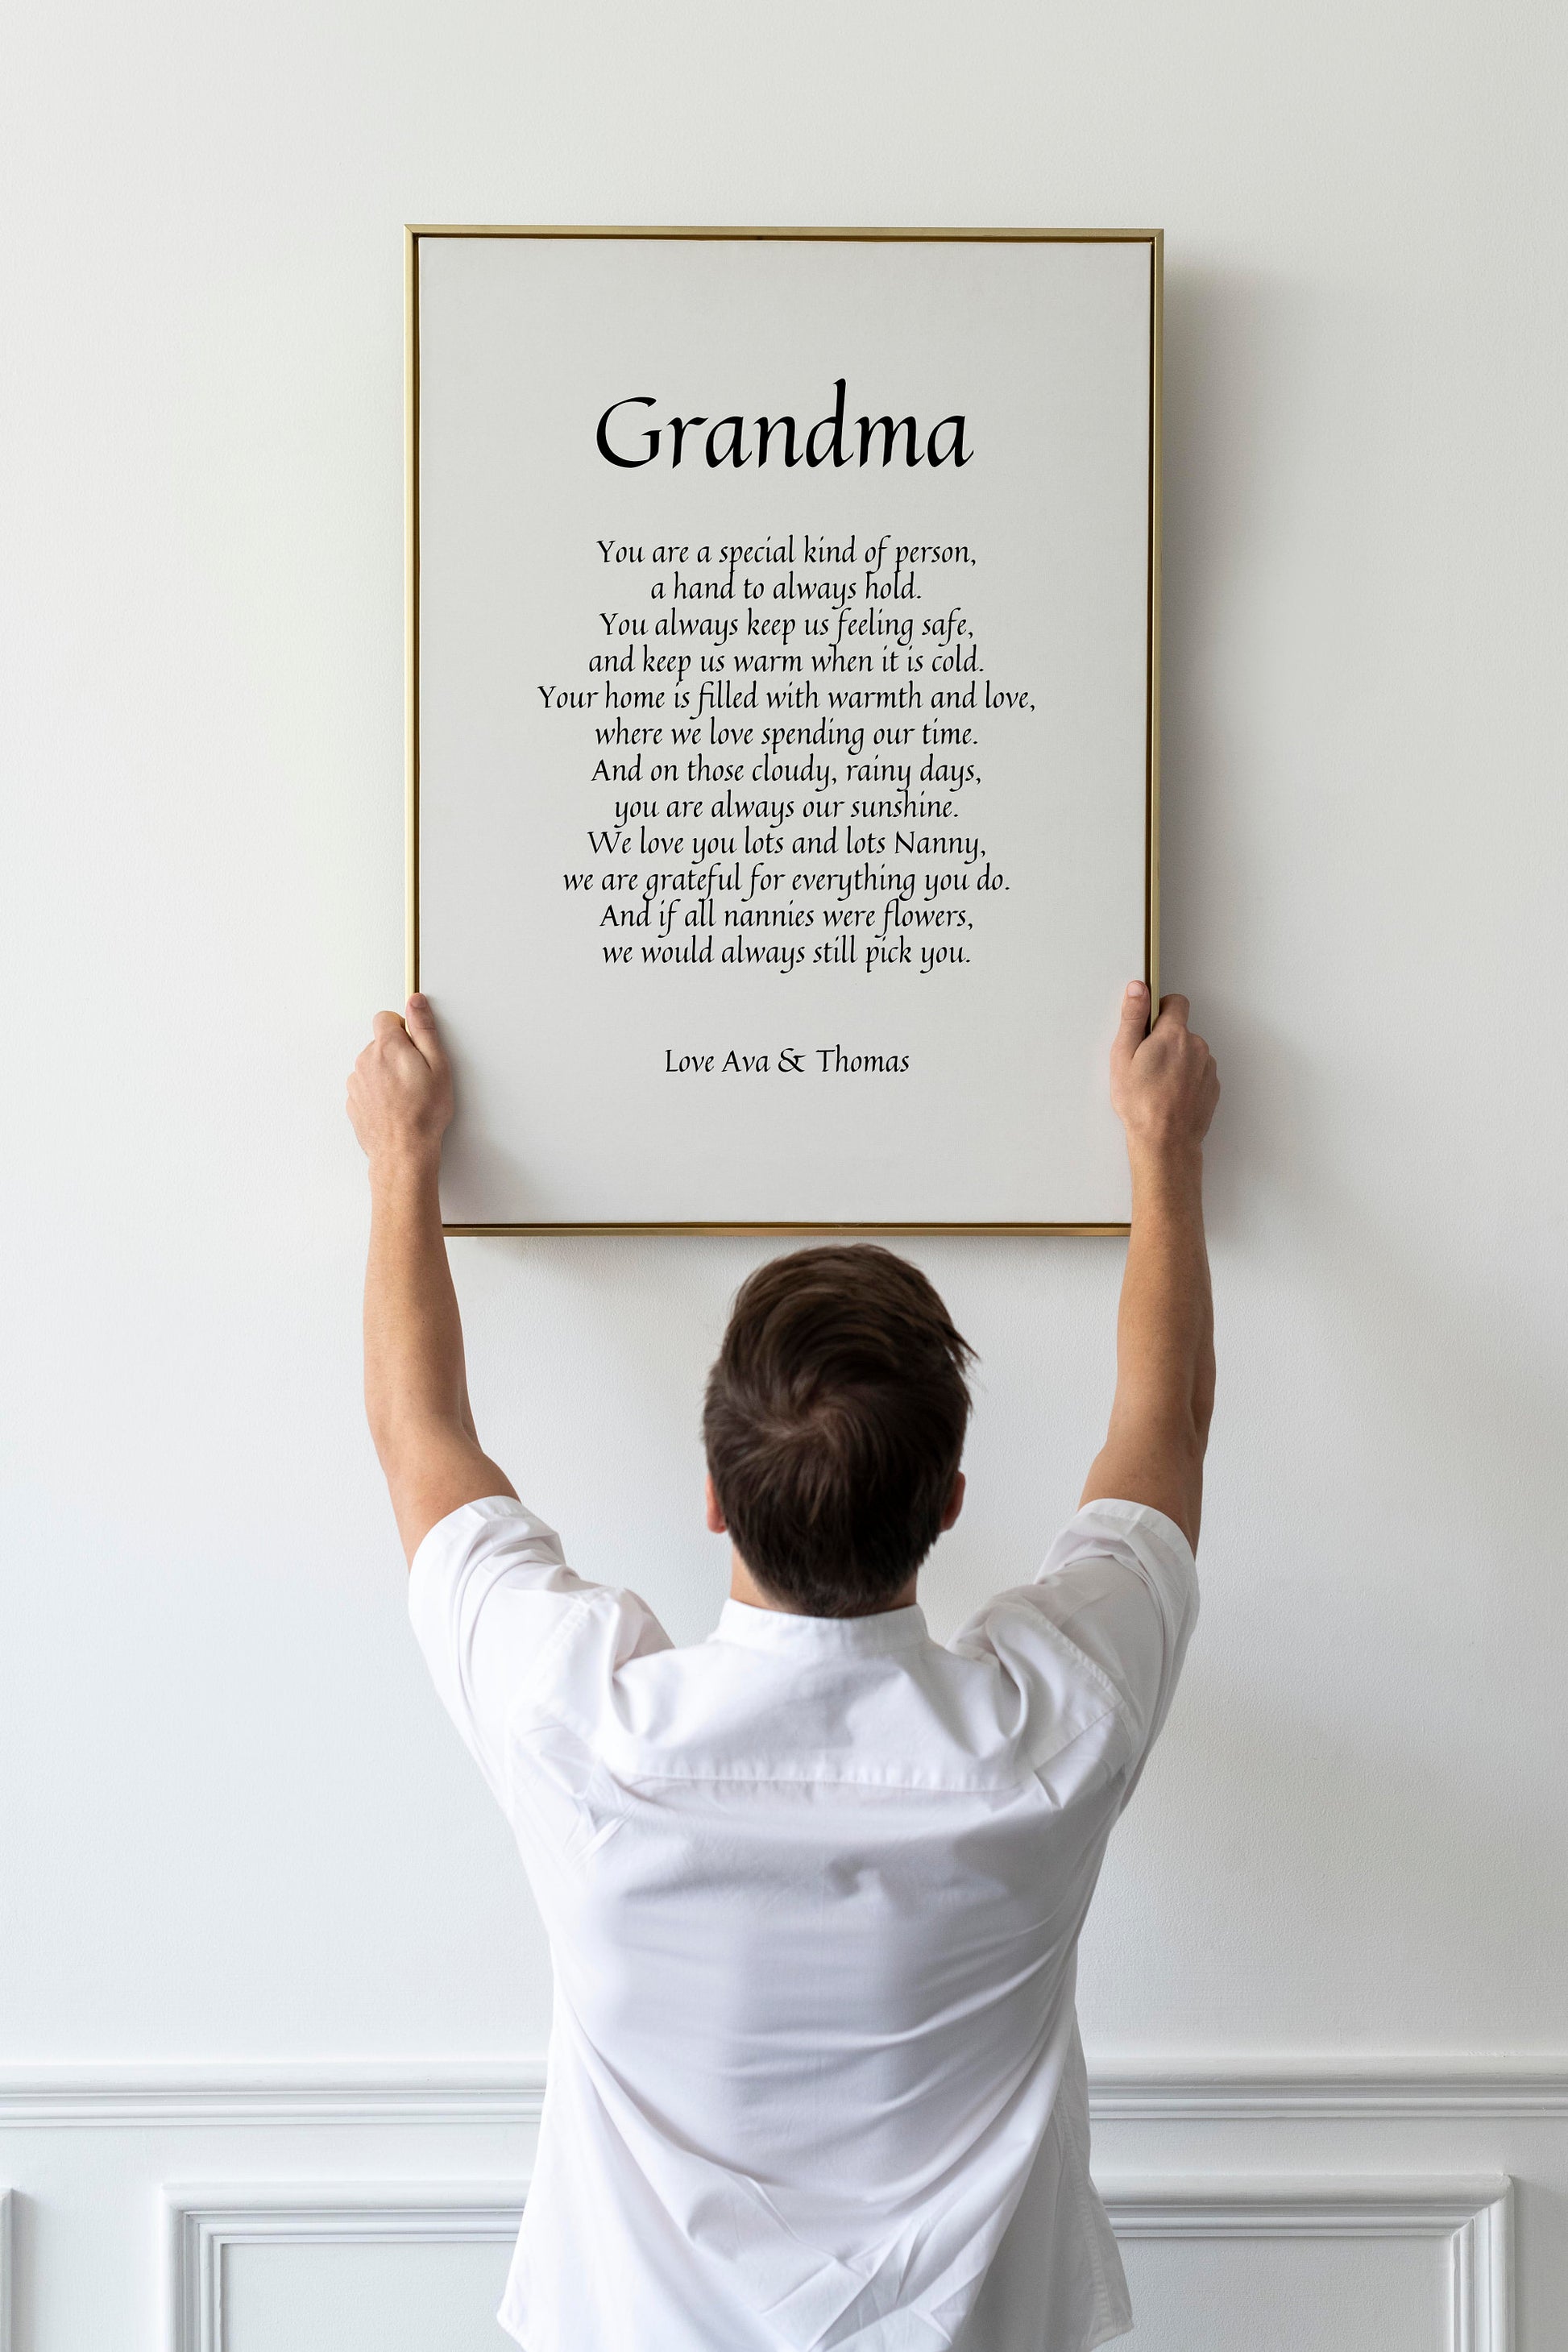 Nanny Custom Framed Print, Grandma poster, Nan Poem print personalised with names. Birthday, mother day, Mother’s Day gift, present